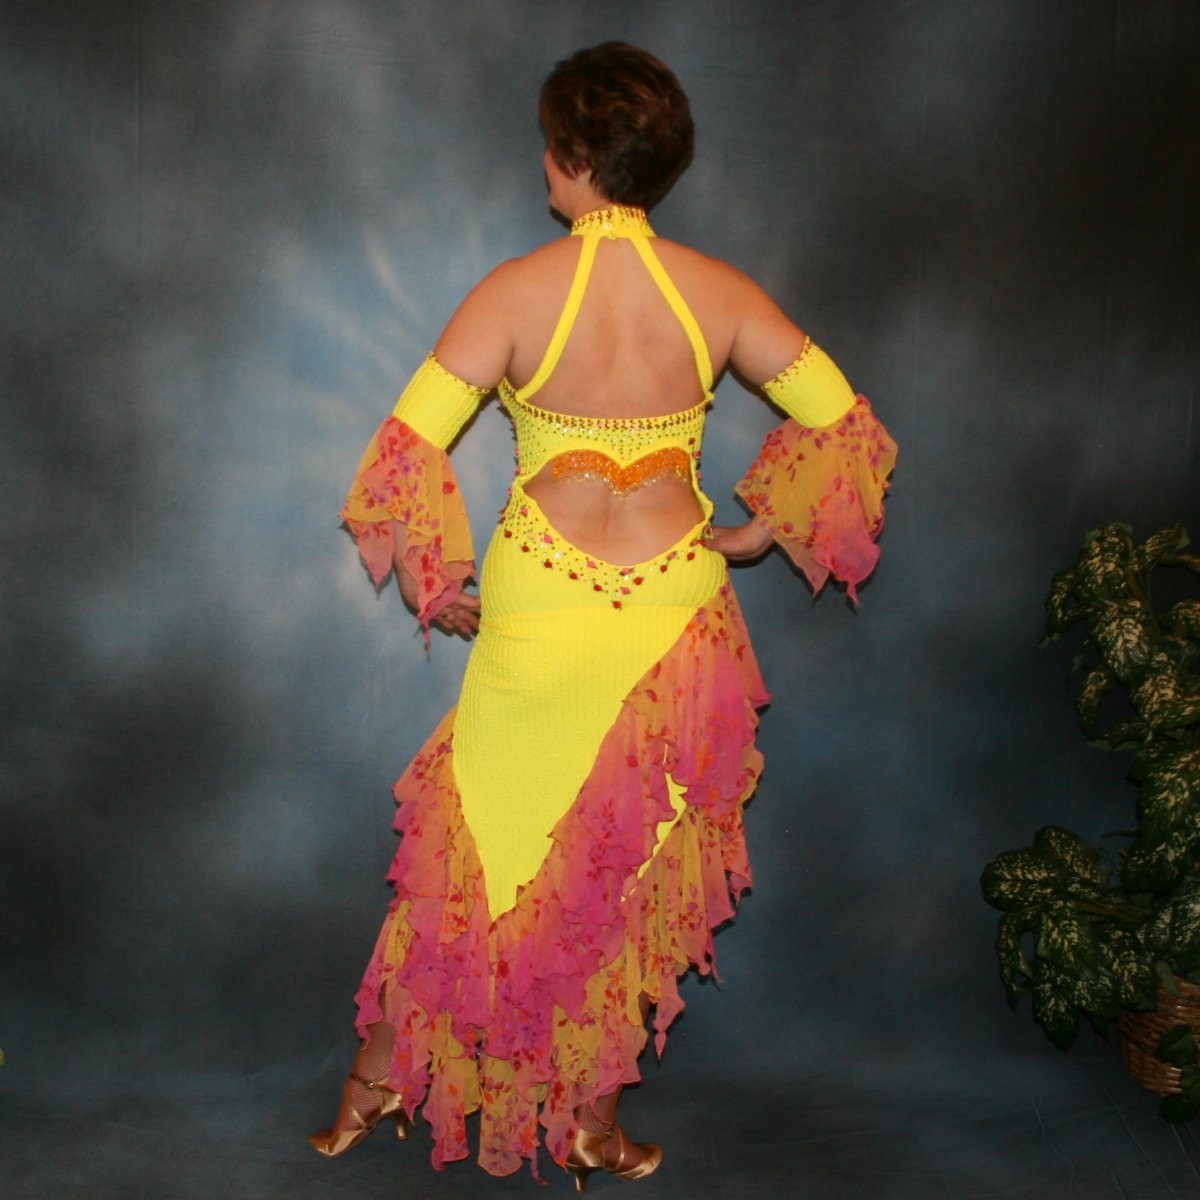 Crystal's Creations back view of Yellow Latin/rhythm dress created in textured lycra, features silk roses along with rose, jonquil(yellow) & hyacinth(orange) Swarovski rhinestones, and 2 rows of flounces of a gorgeous delicate oriental floral print chiffon.